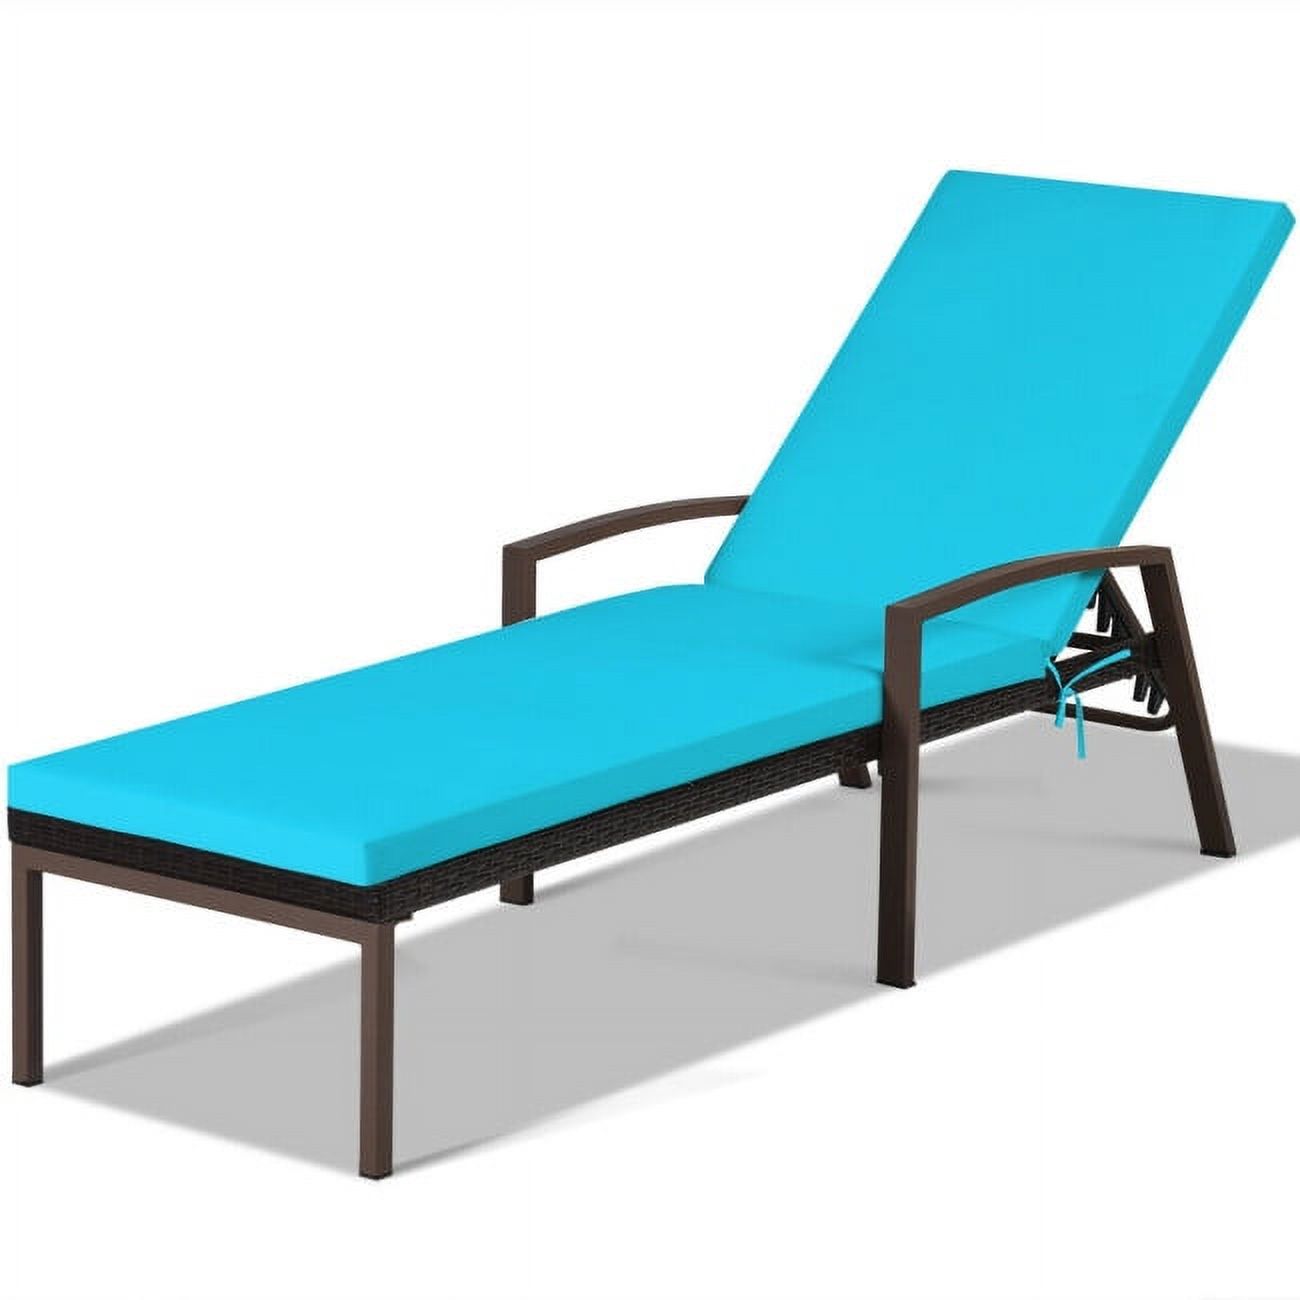 GIVIMO Outdoor Adjustable Reclining Patio Rattan Lounge Chair Turquoise - image 1 of 8